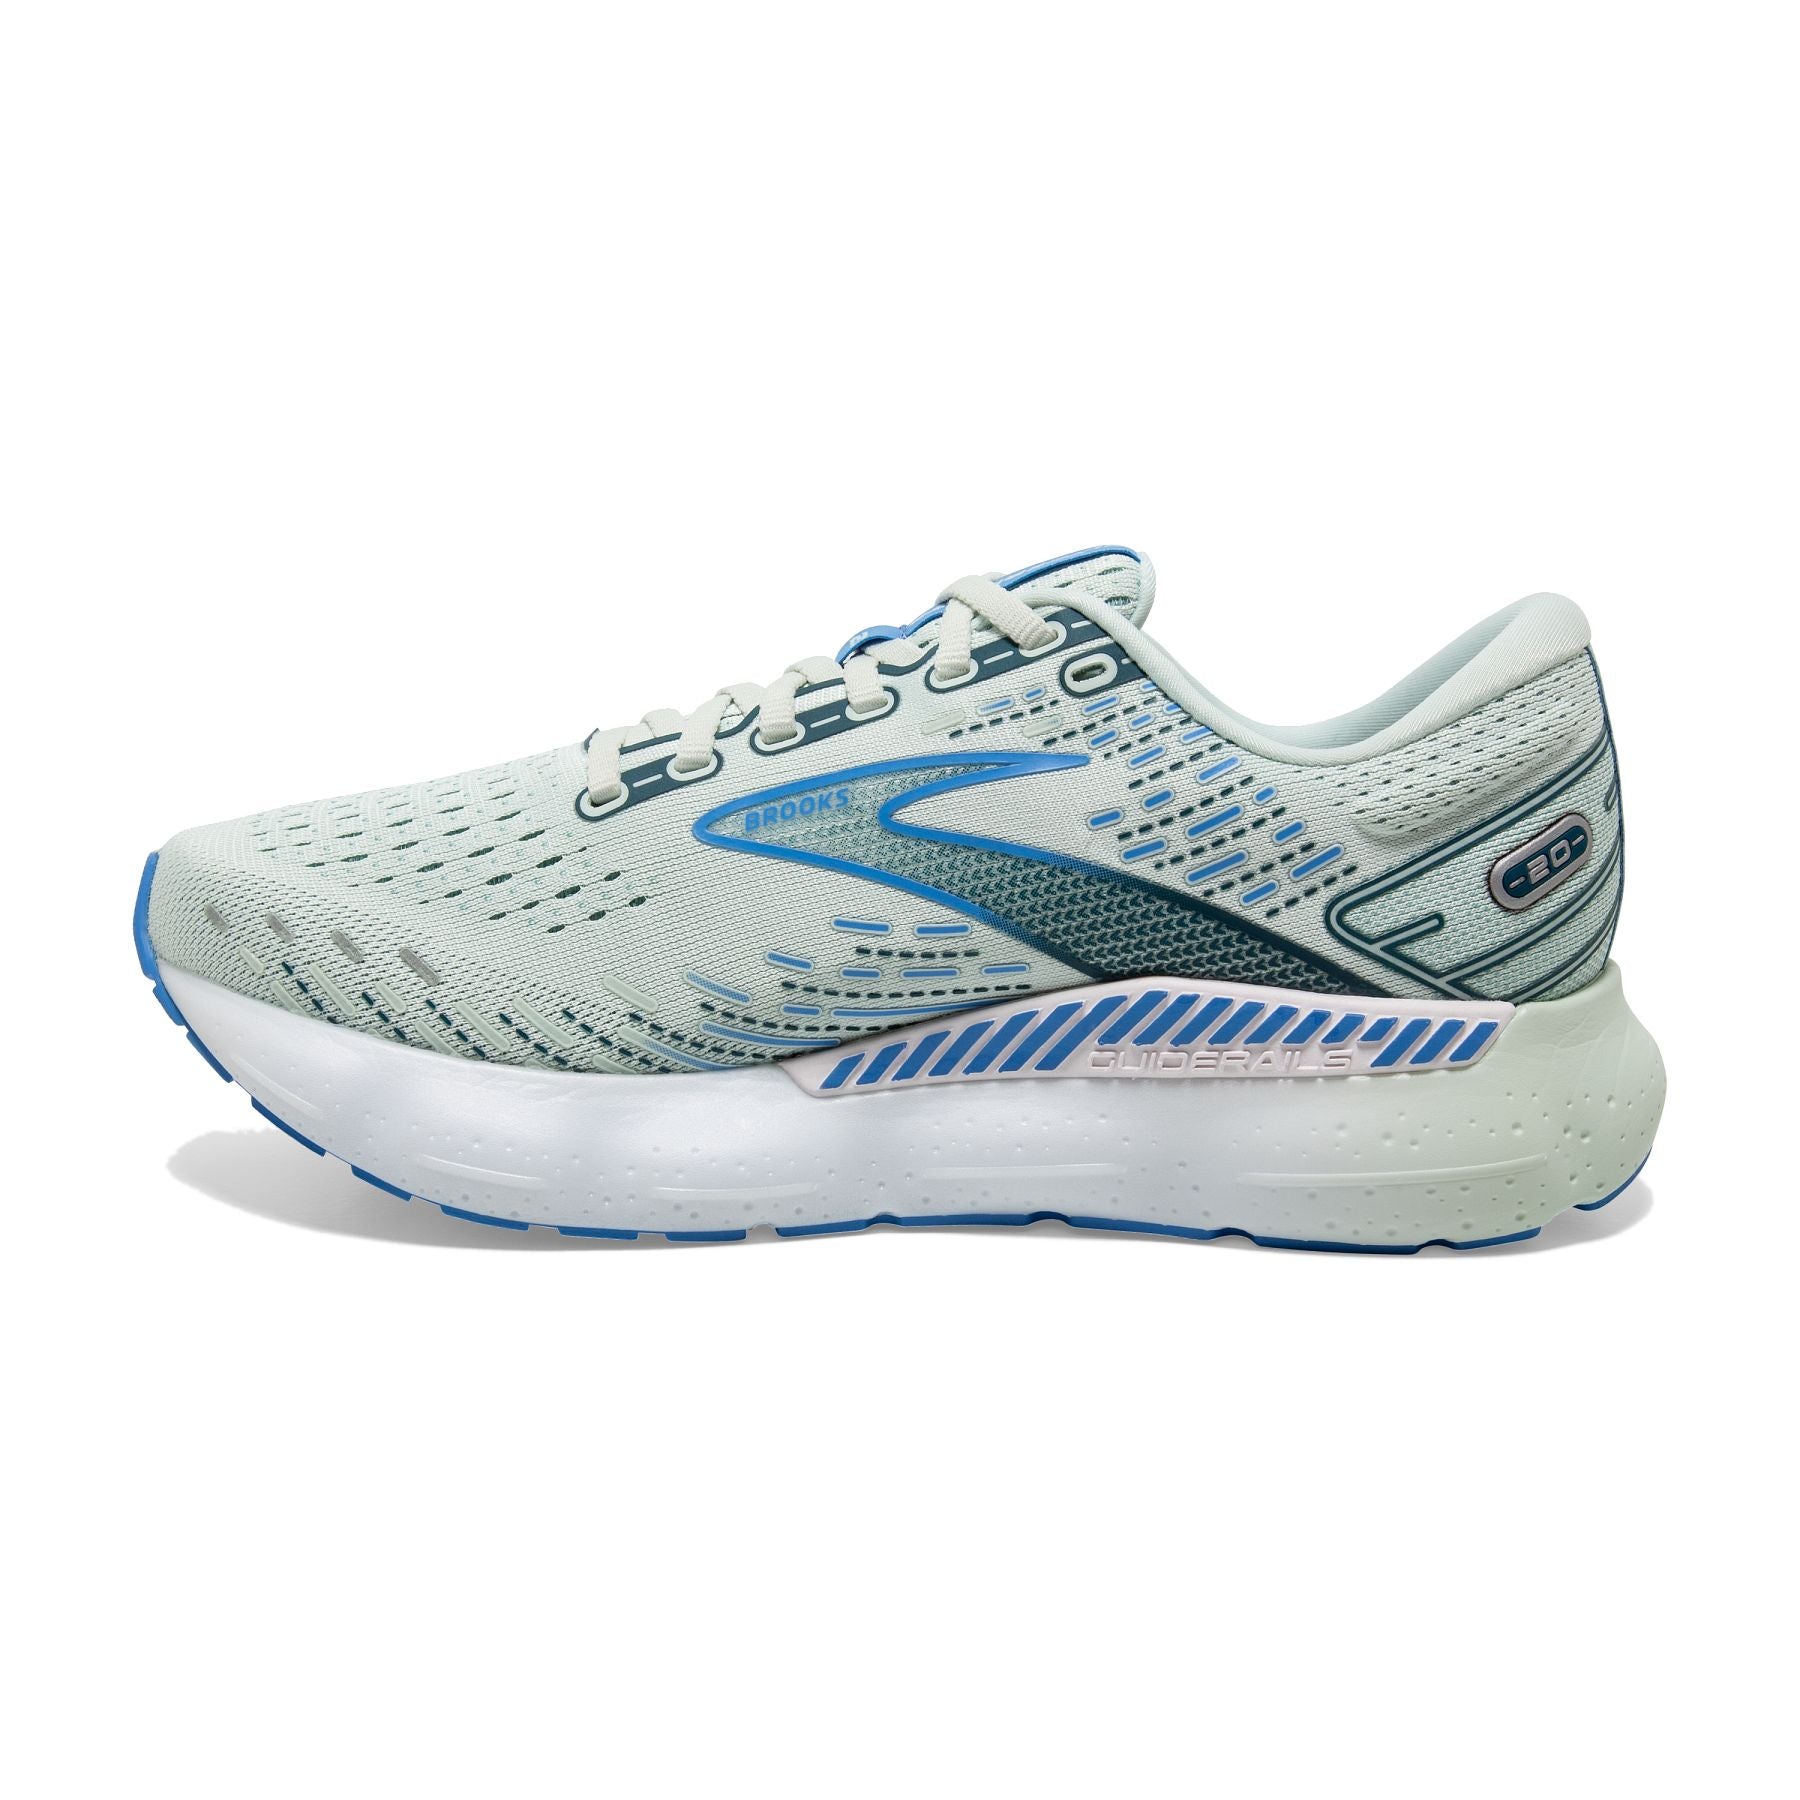 Medial view of the Women's Glycerin GTS 20 by Brook's in the color Blue Glass/Marina/Legion Blue